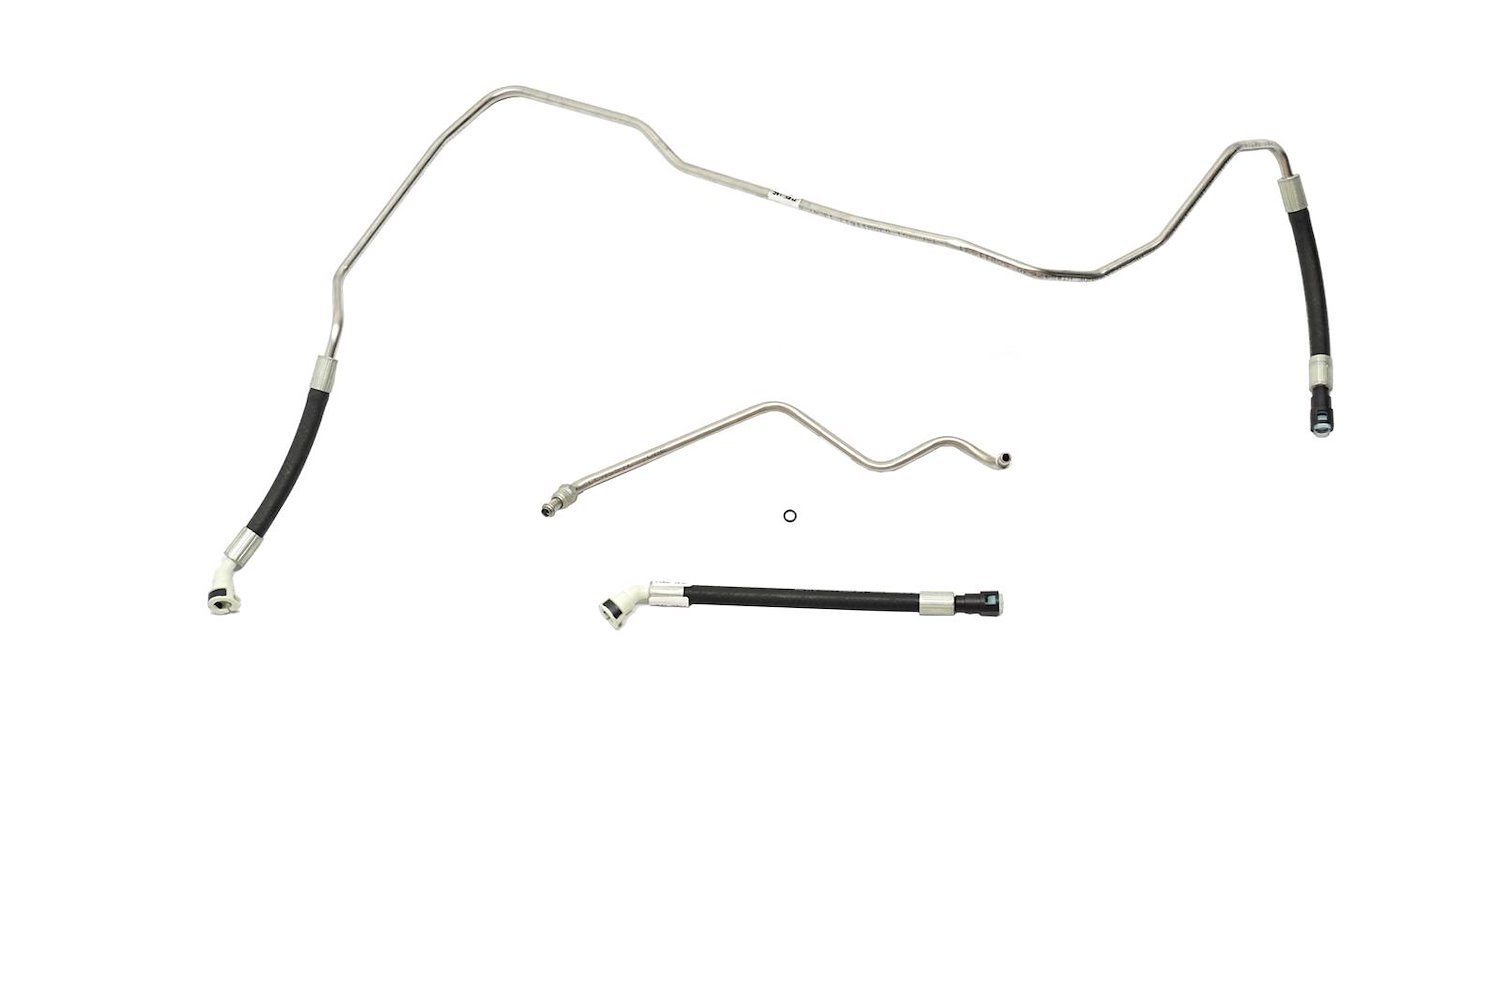 Chevy / GMC Tahoe Fuel Supply Line -2003 2004 2005 2006